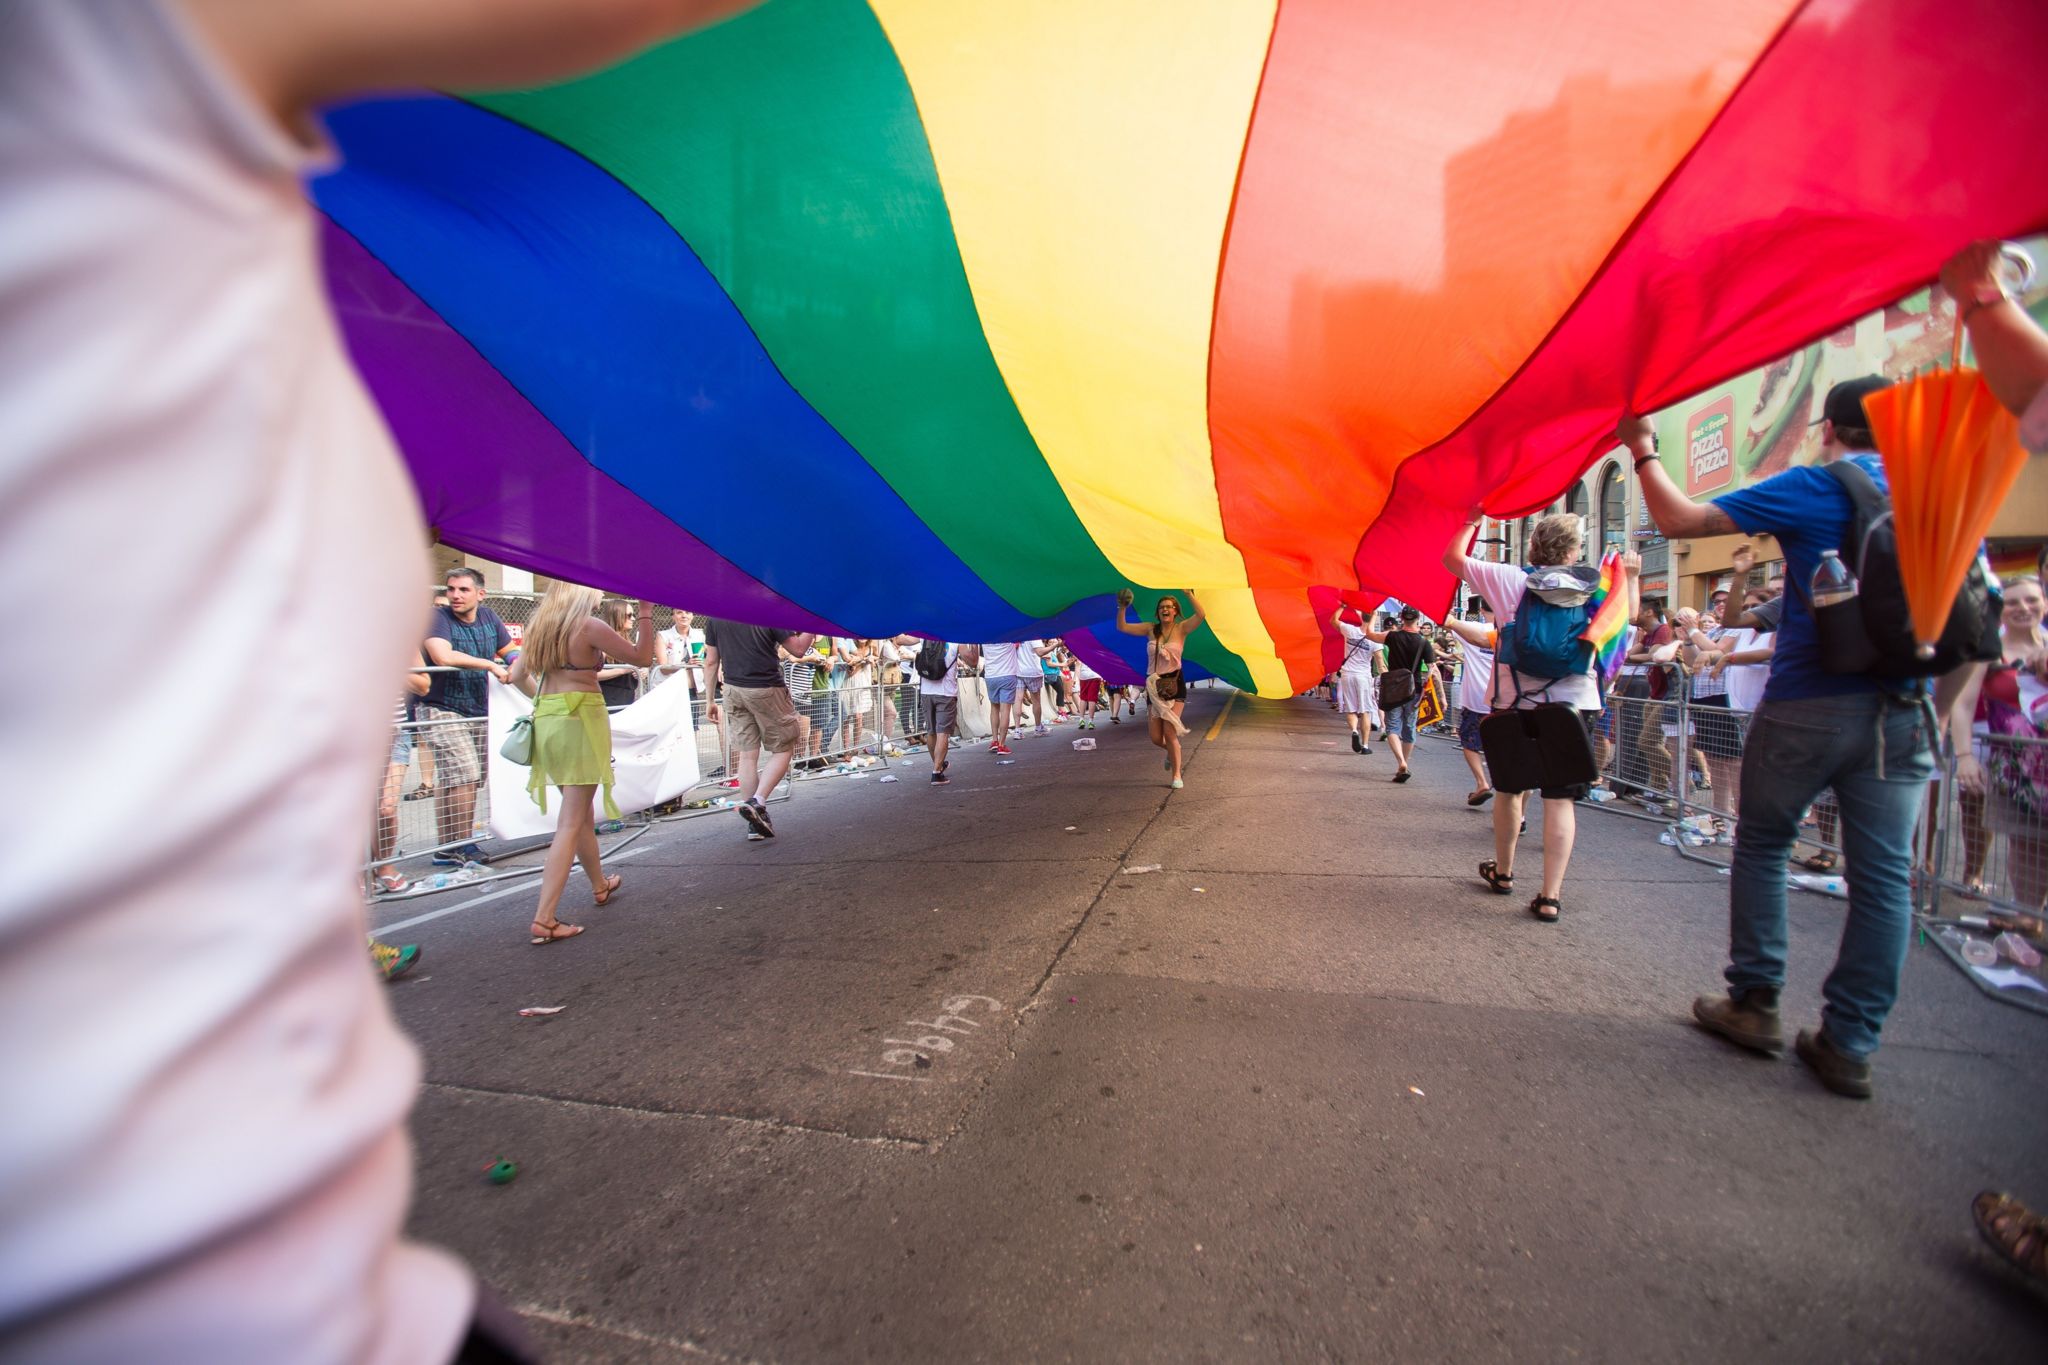 A woman runs under a giant rainbow flag during the WorldPride 2014 Parade in Toronto, Canada,